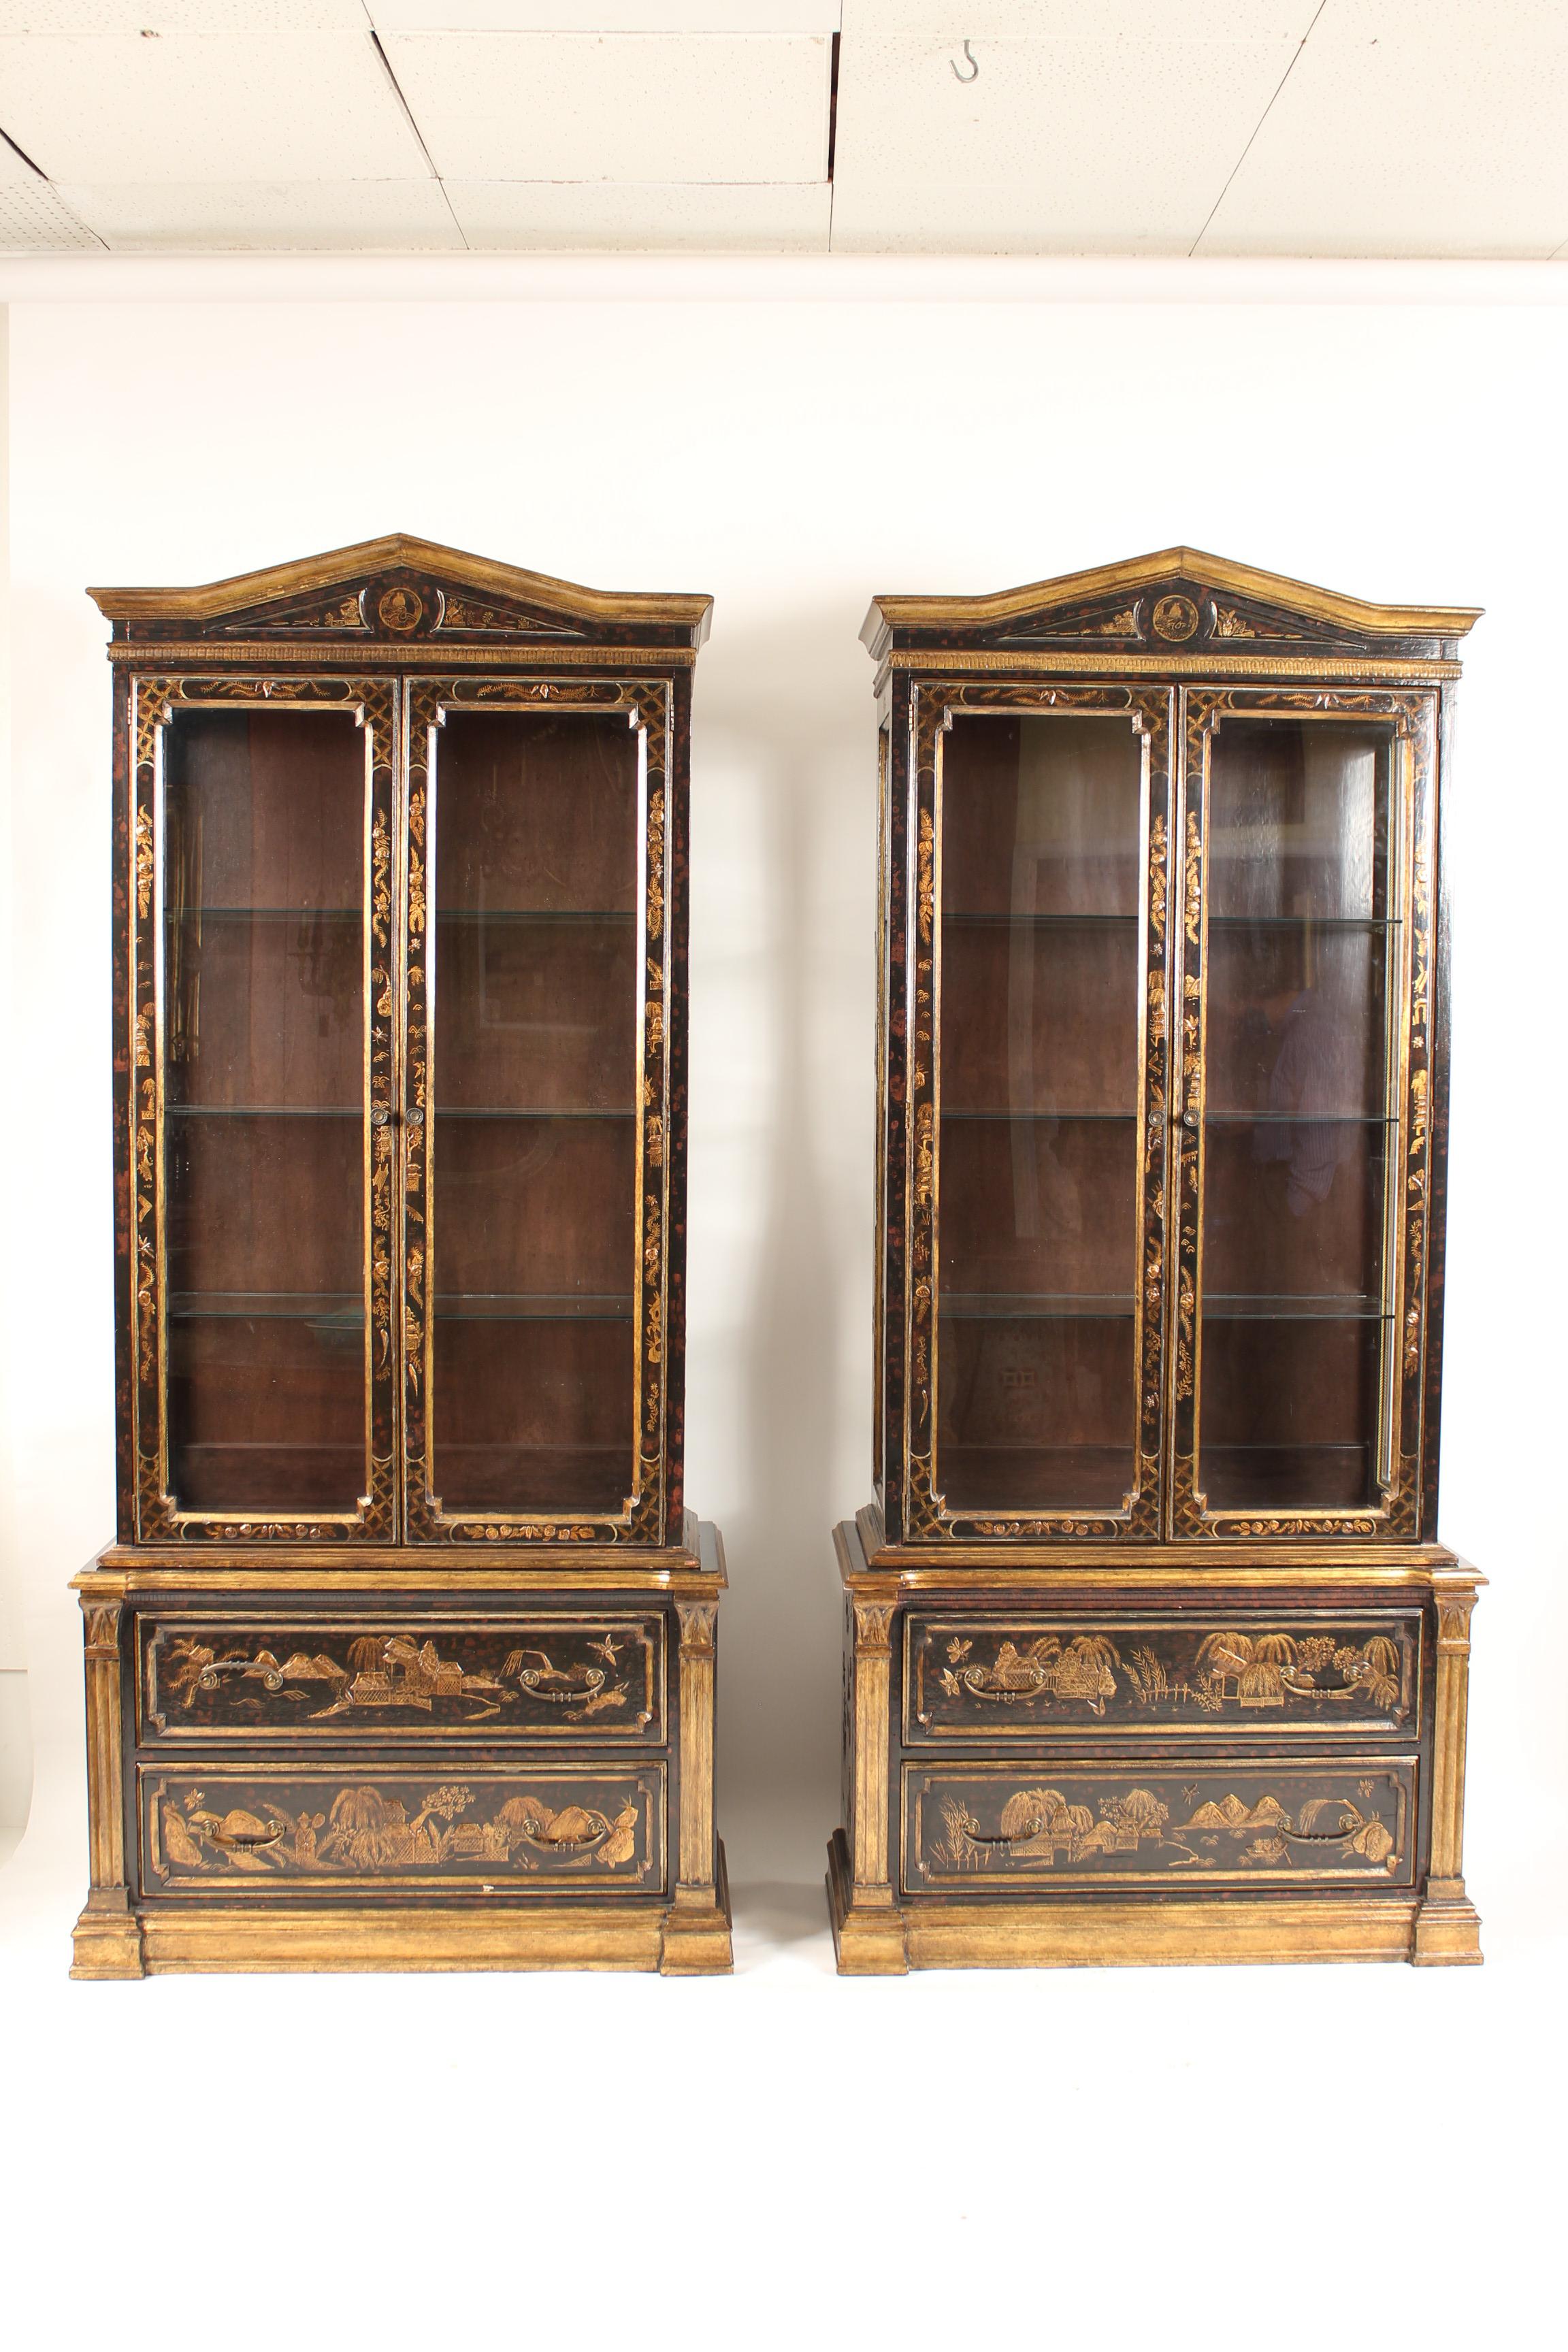 Pair of George III style chinoiserie decorated display cabinets, mid-20th century. With raised chinoiserie decorations,
interior lighting and glass shelves. The cabinets made by Davis cabinet company.